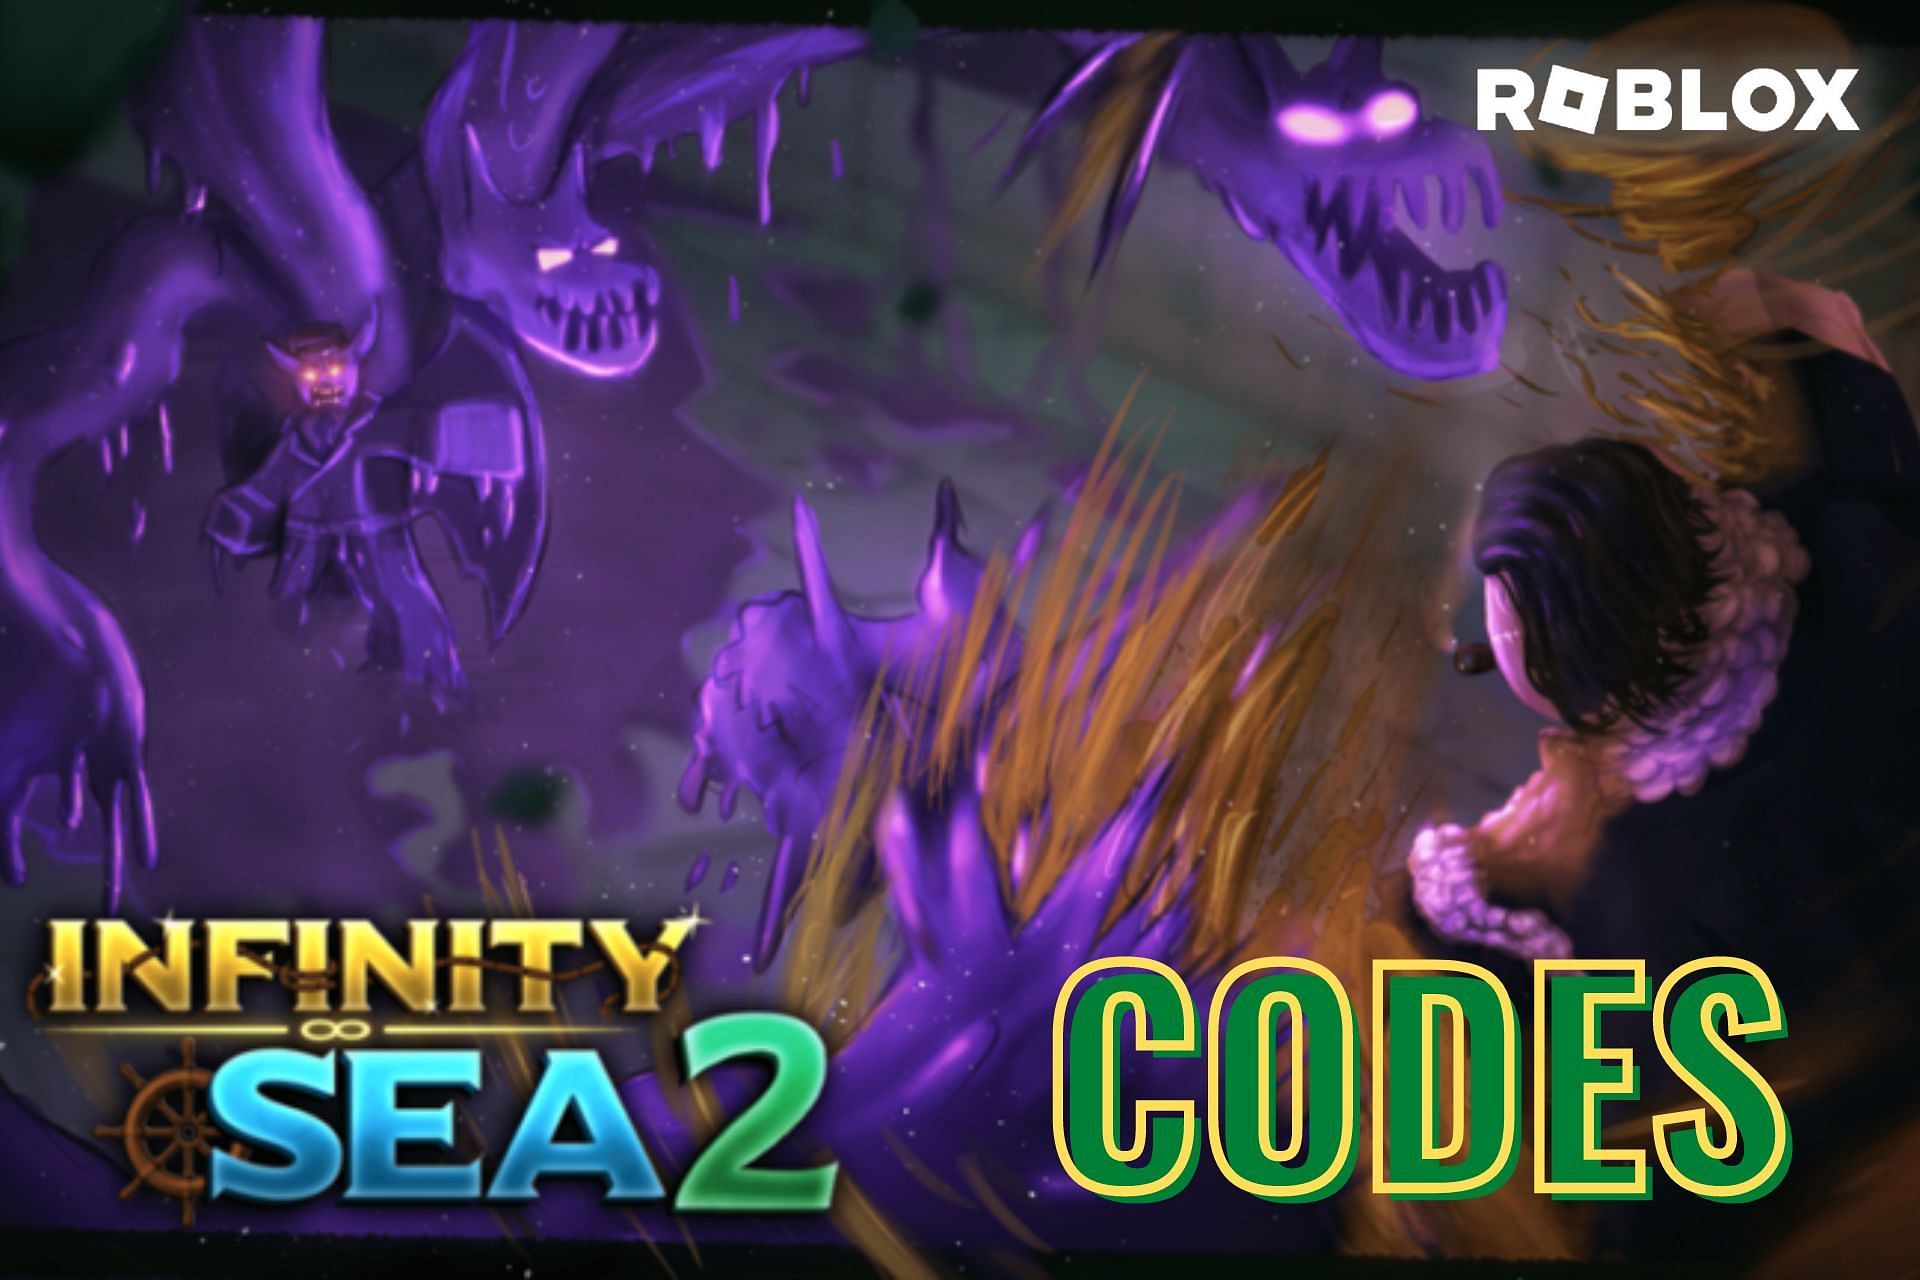 Roblox Infinity Sea 2 codes for November 2022: Free EXP, beli, and more